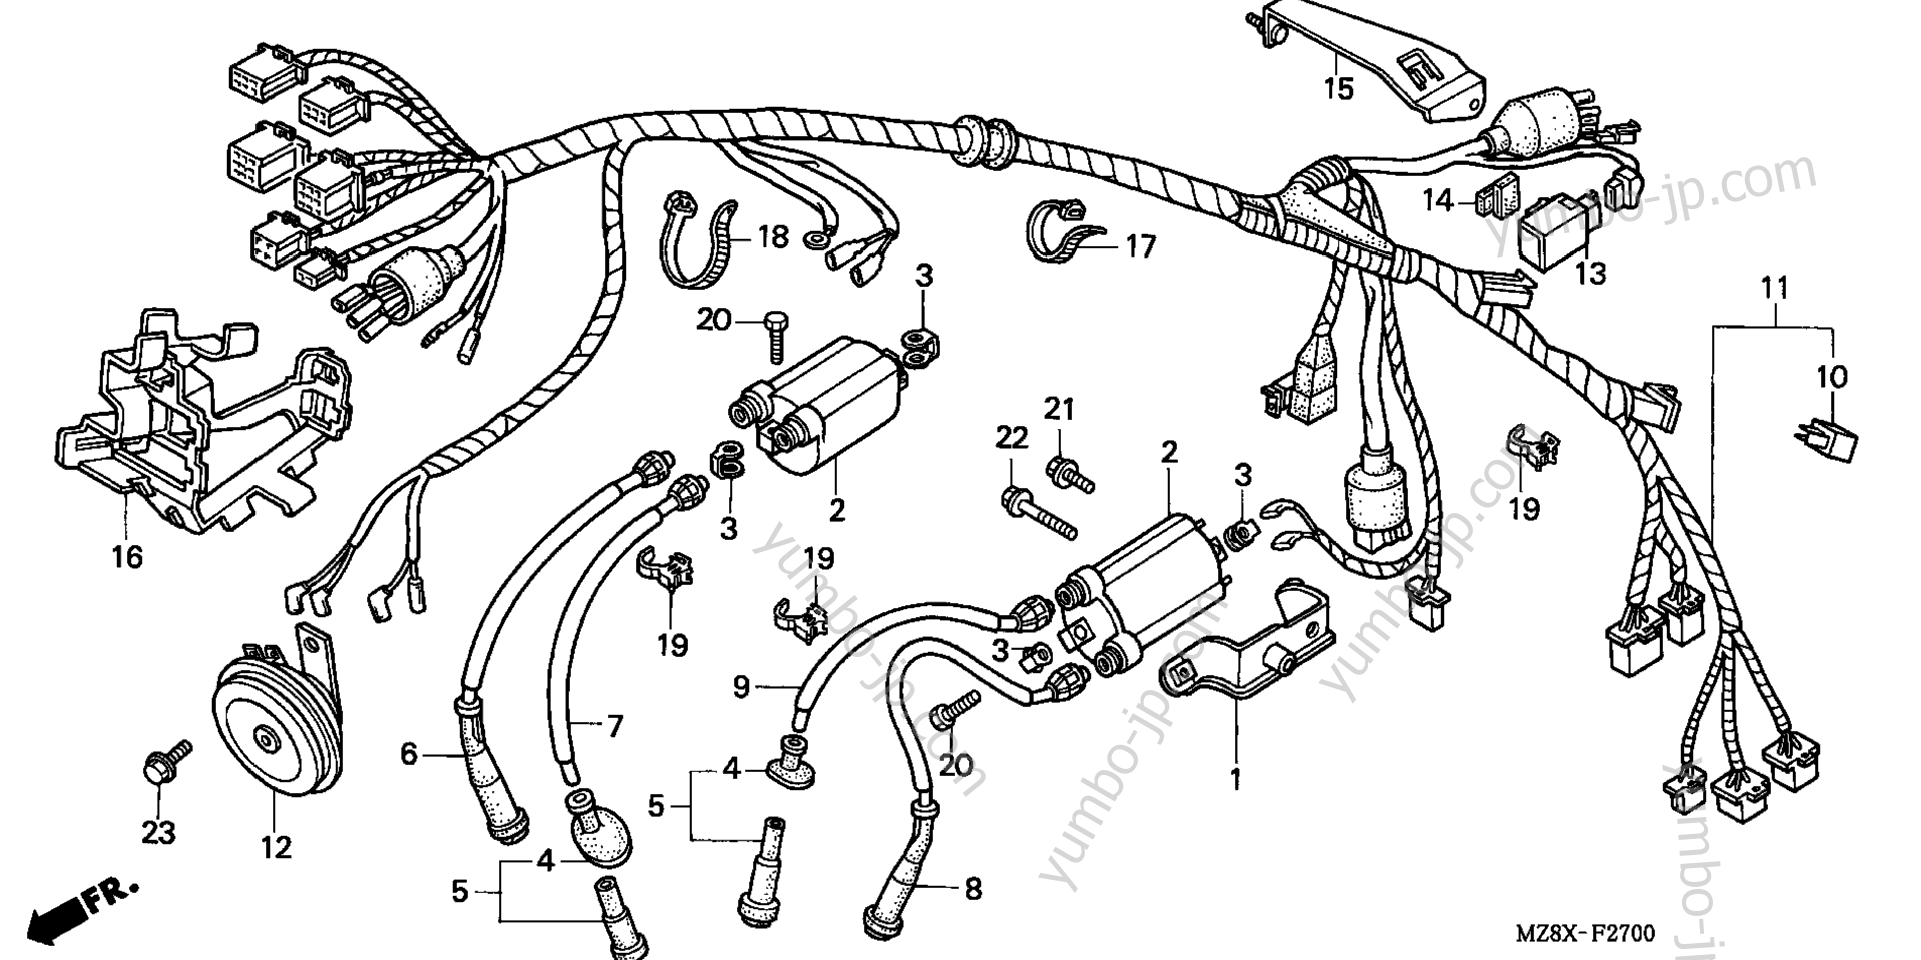 WIRE HARNESS for motorcycles HONDA VT600C AC 2003 year